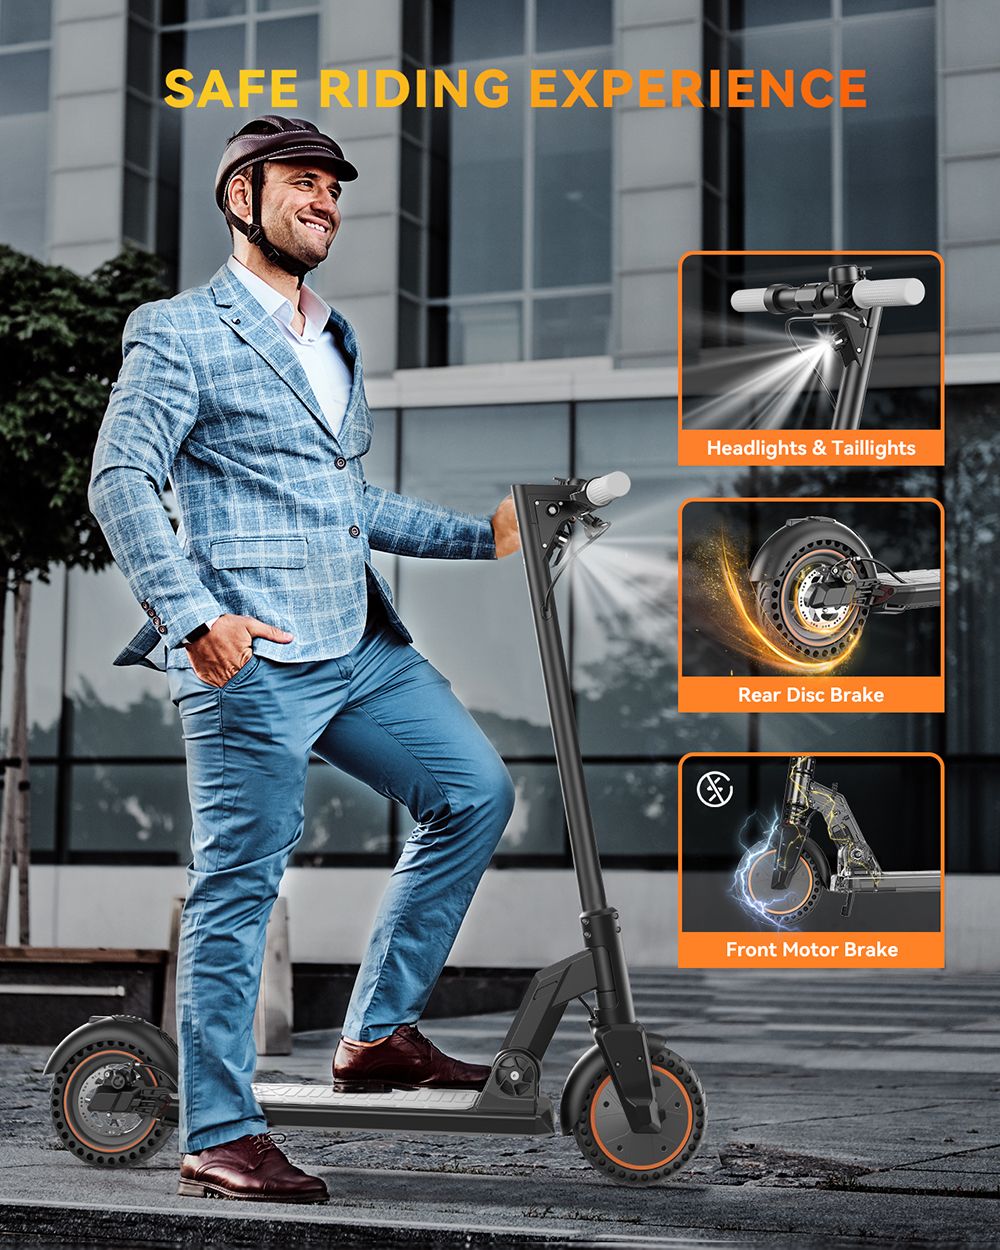 5TH WHEEL M2 Electric Scooter 8.5'' Honeycomb 350W Motor 7.5Ah Battery for 30km Range, 25km/h Max Speed